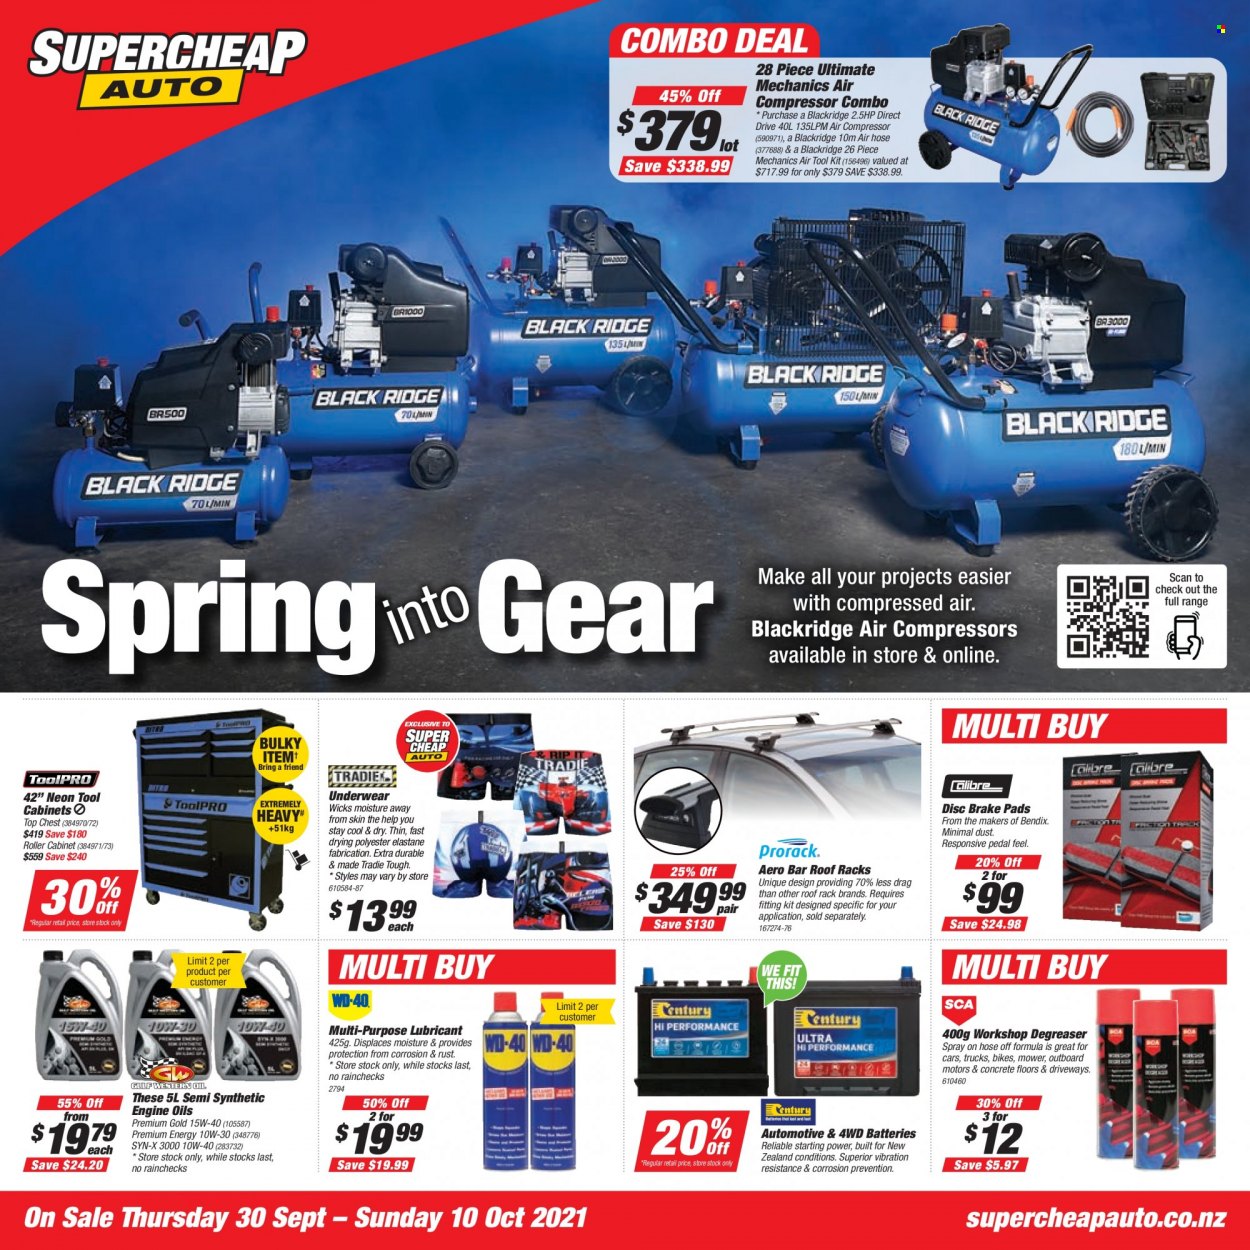 thumbnail - SuperCheap Auto mailer - 30.09.2021 - 10.10.2021 - Sales products - battery, tool set, air compressor, cabinet, lubricant, air hose, tool cabinets, brake pad, roof rack, car battery, automotive batteries, degreaser. Page 1.